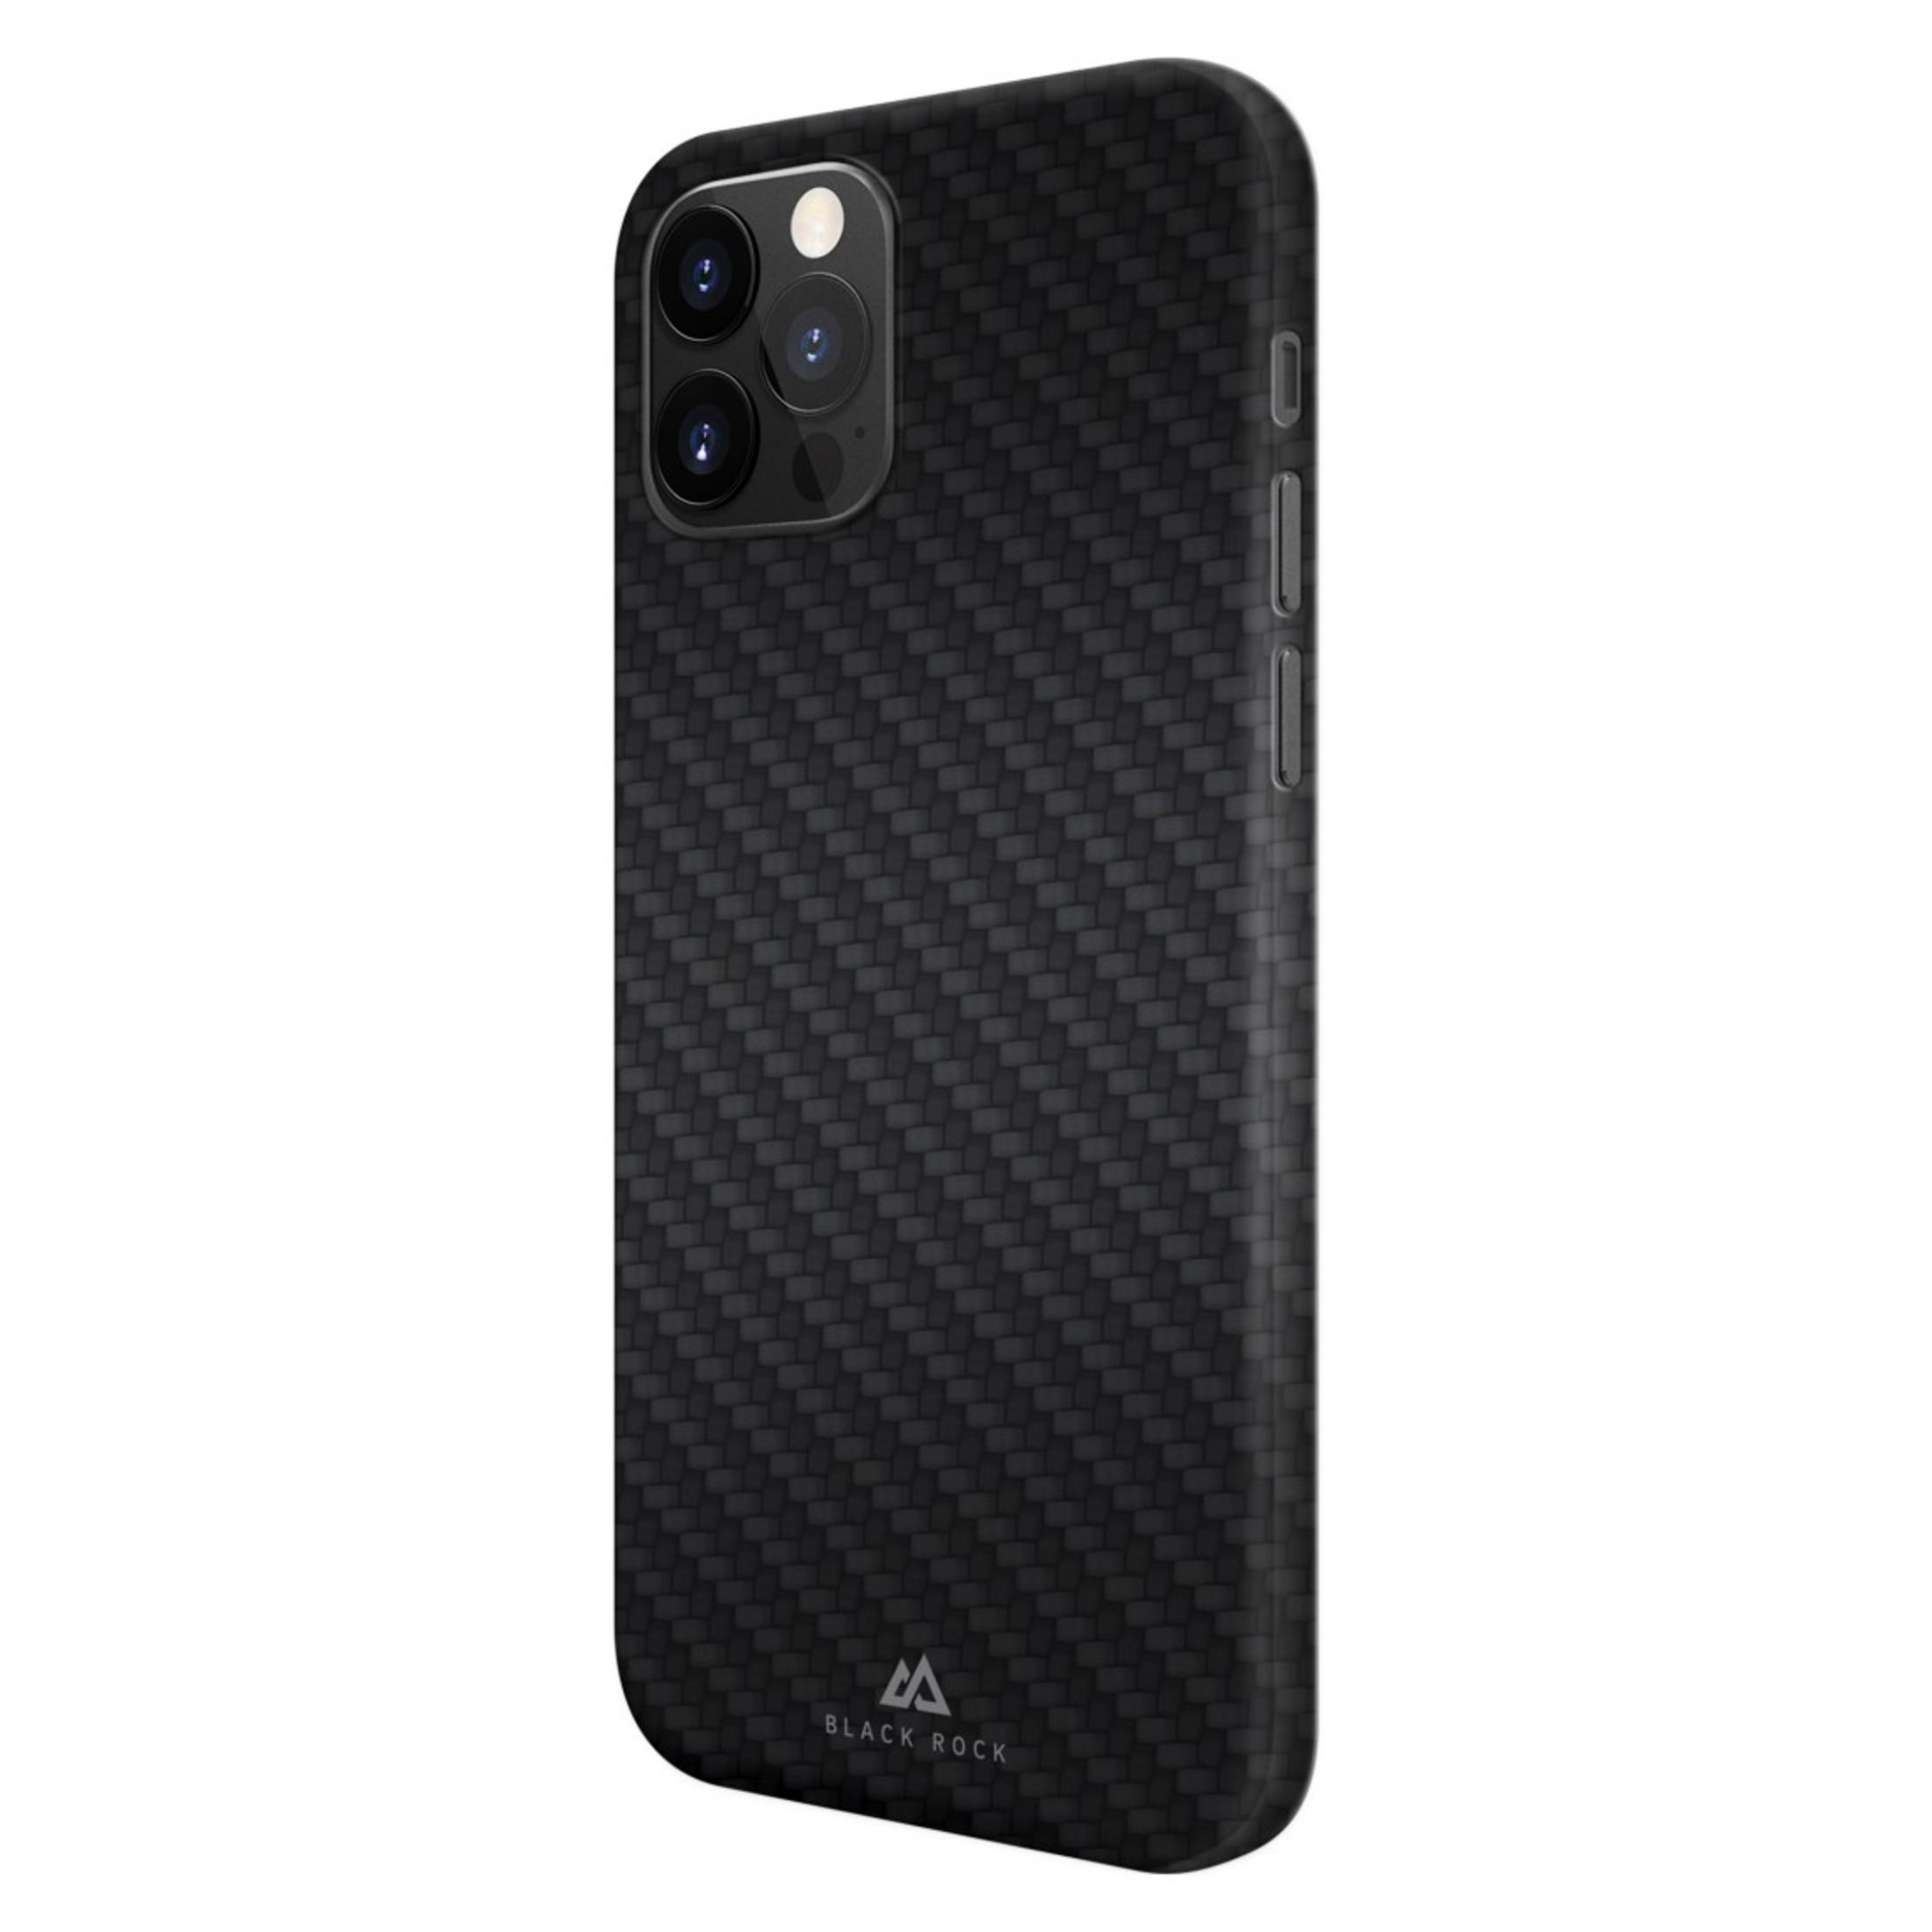 13, IPH13 COVER ULTRA Schwarz Apple, ICED 217020 iPhone SCHWARZ/CARBON, THIN ROCK BLACK Backcover,